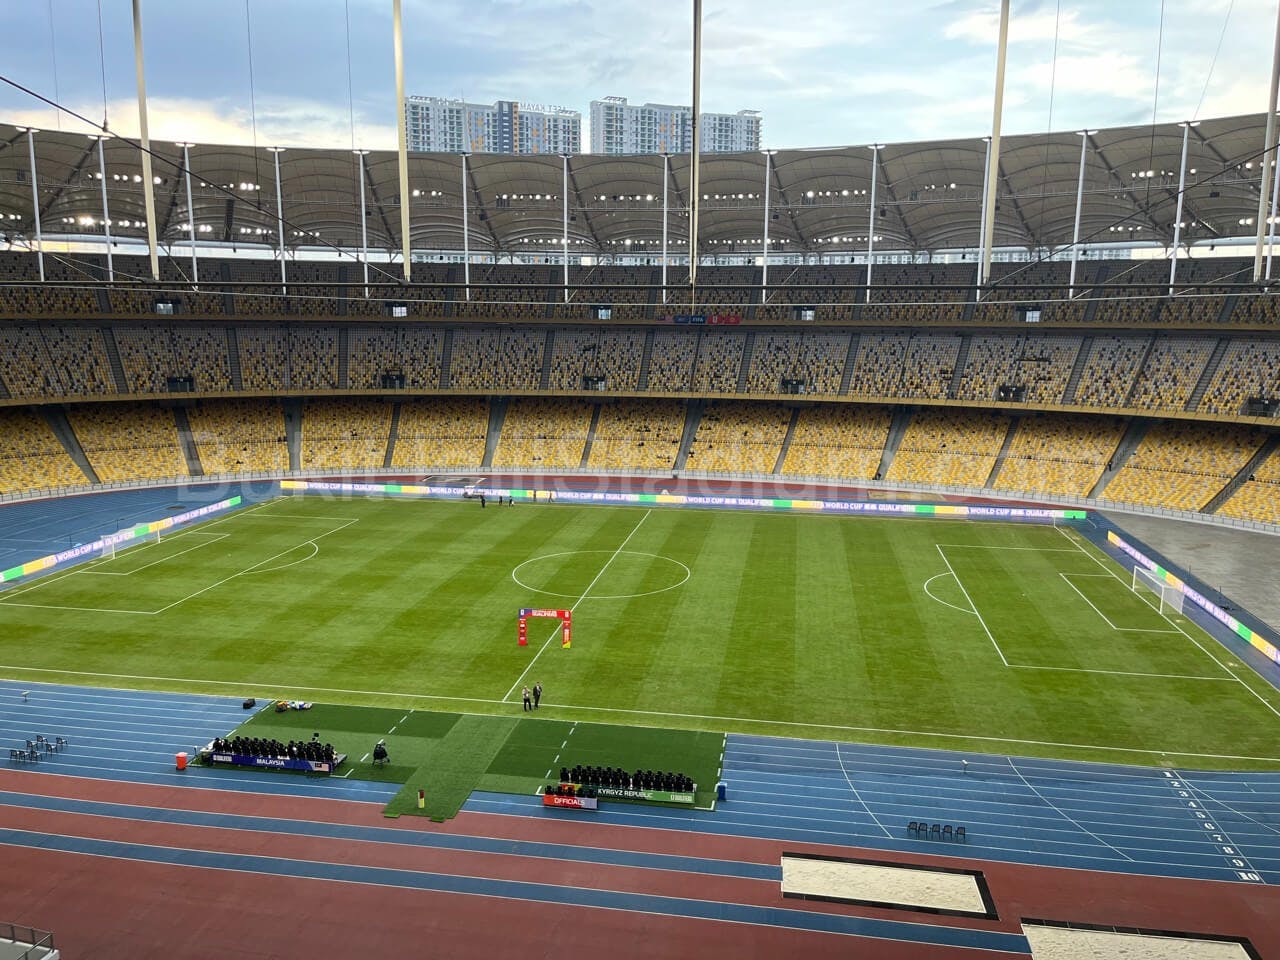 1x View of Bukit Jalil field from section 330 of Stadium Bukit Jalil.